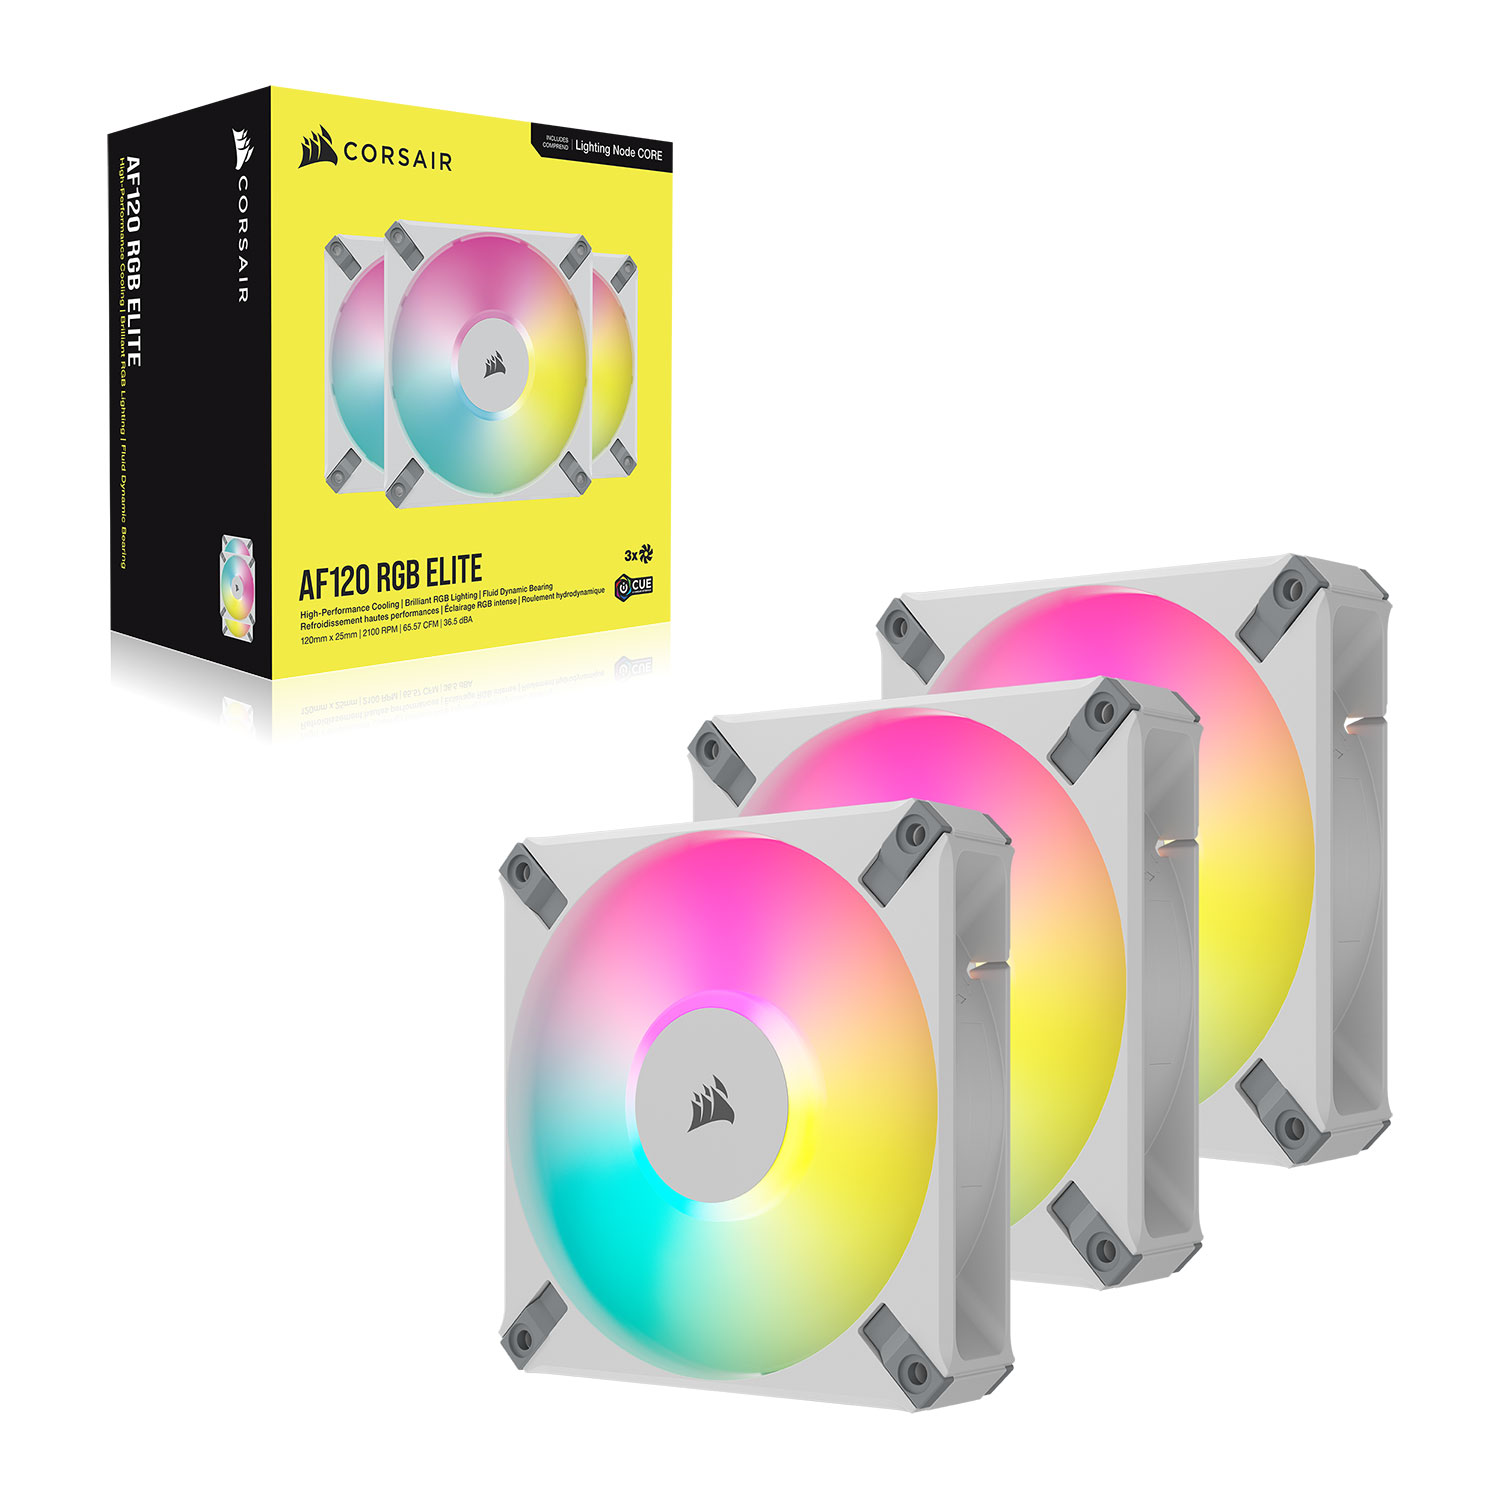 Corsair Co-9050158-Ww Af120 Elite Rgb Tripple X3 Kit White + Controller ( Lighting Node Core ) – With 8x Rgb Leds 120x120x25mm Fluid Dynamic Bearing 7 Blades Pwm Fans With Airguide 550-2100rpm 5-34dba 13.8-65.7cfm 0.17-2.68mm/H2o Static Pressure